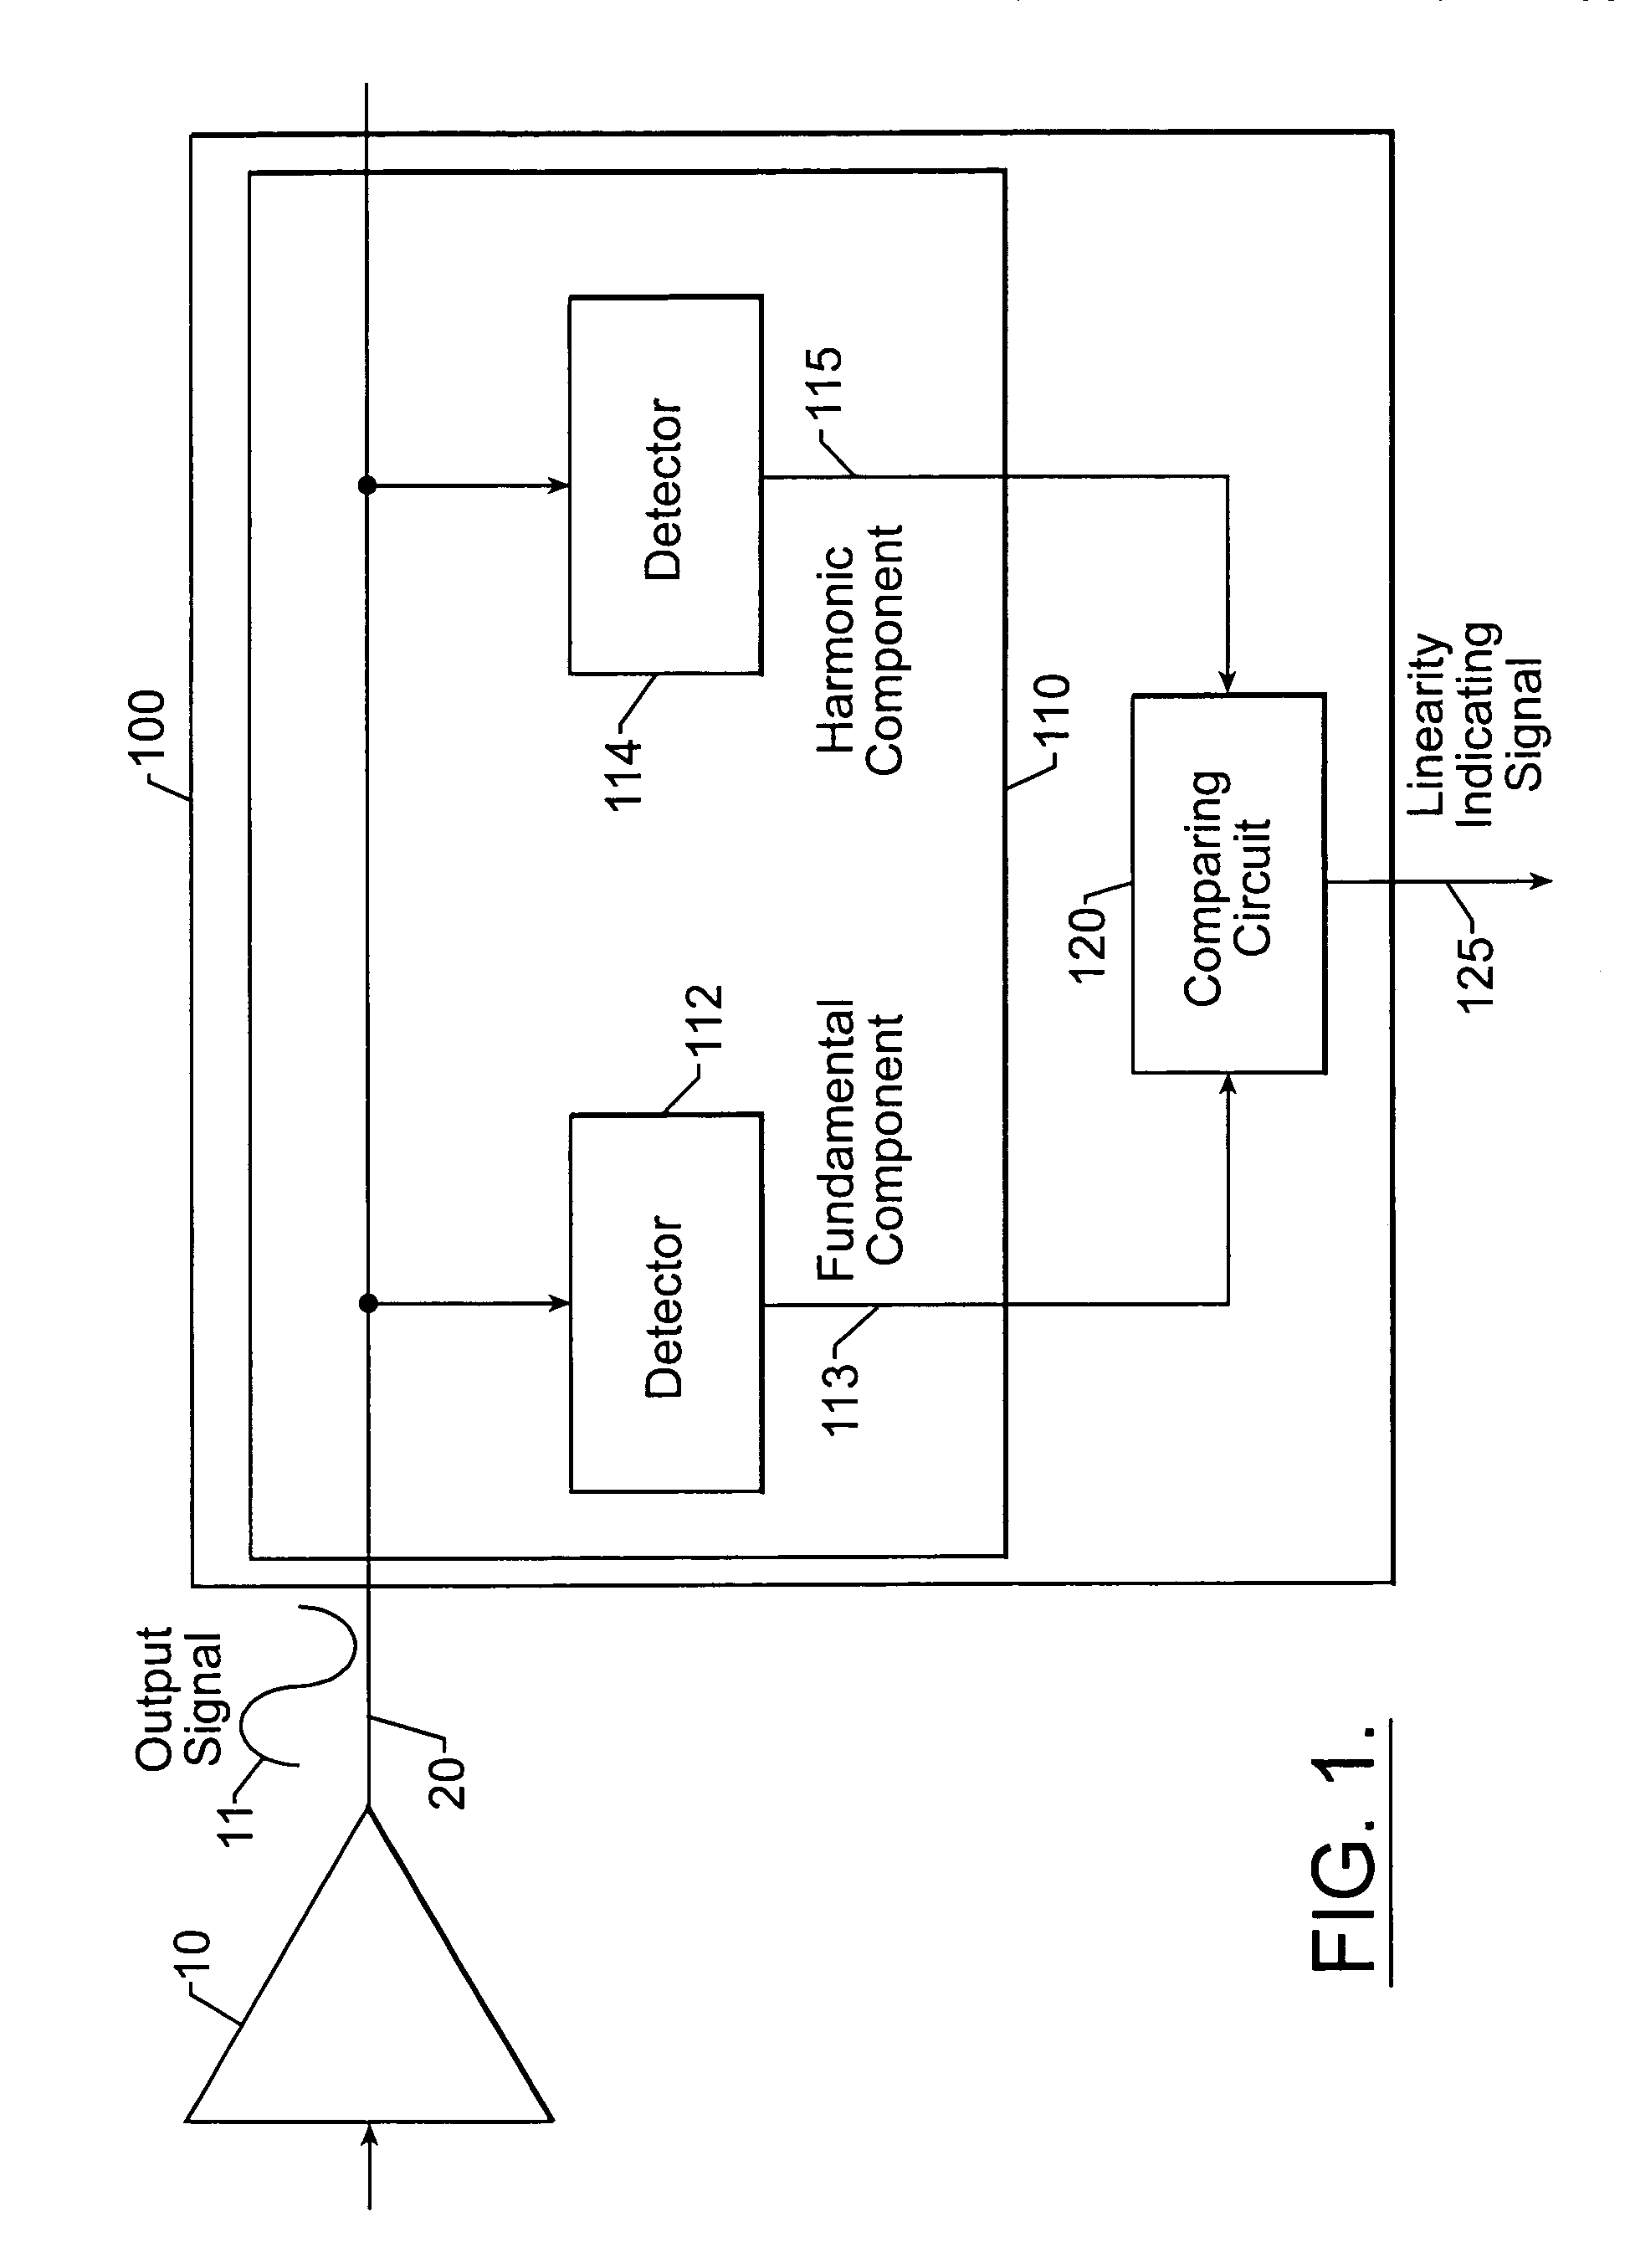 Apparatus and methods for monitoring and controlling power amplifier linearity using detected fundamental and harmonic components